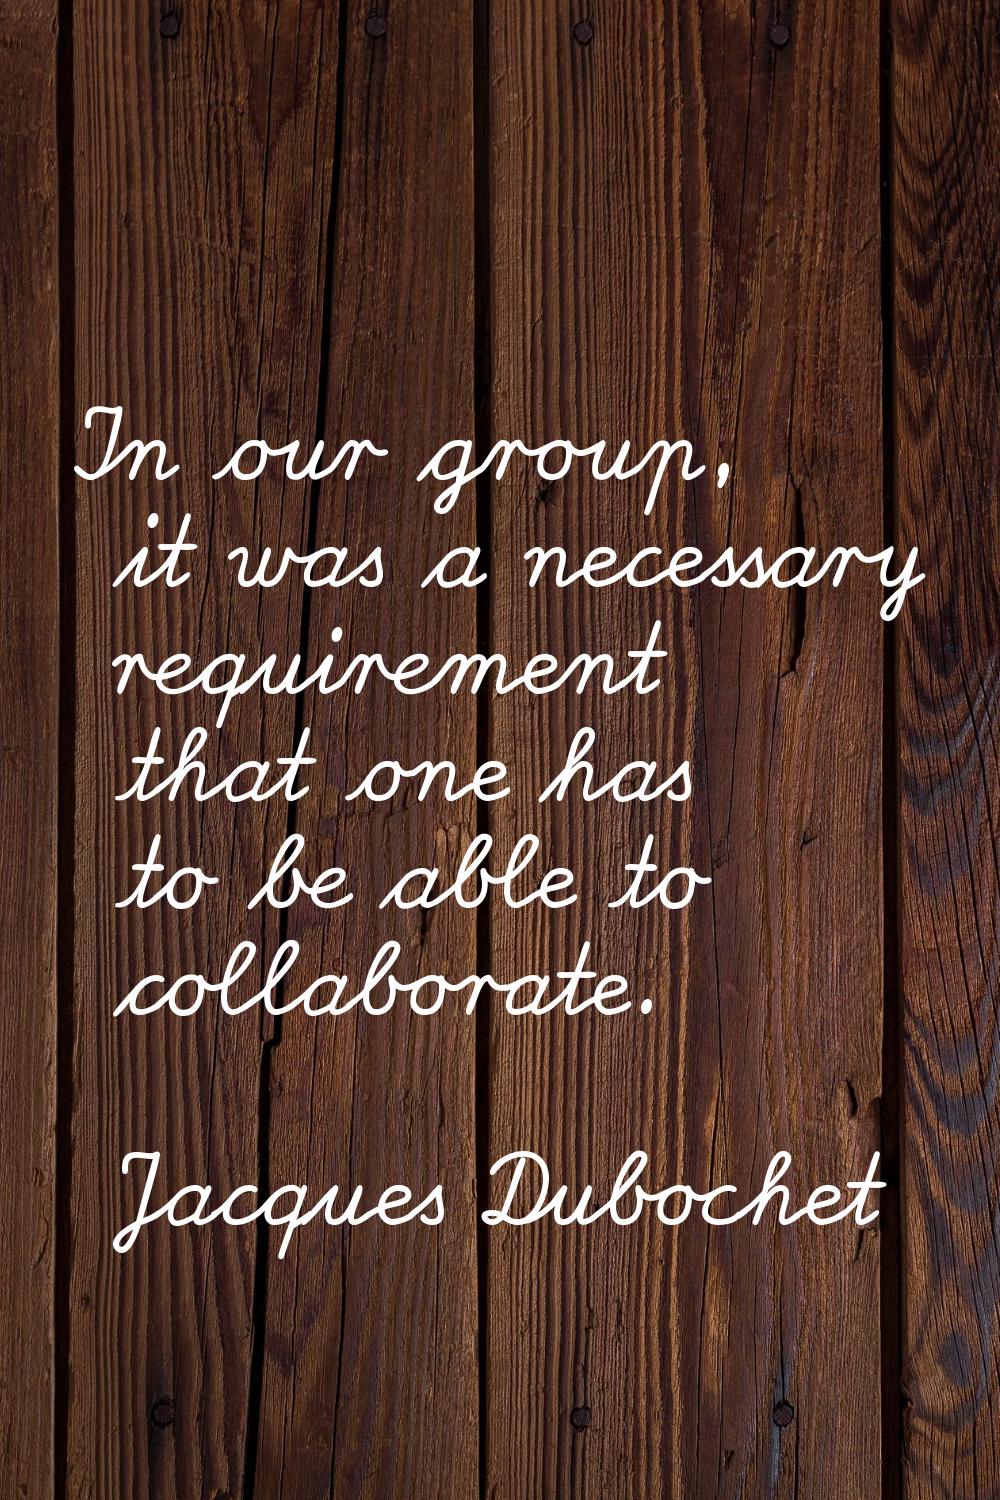 In our group, it was a necessary requirement that one has to be able to collaborate.